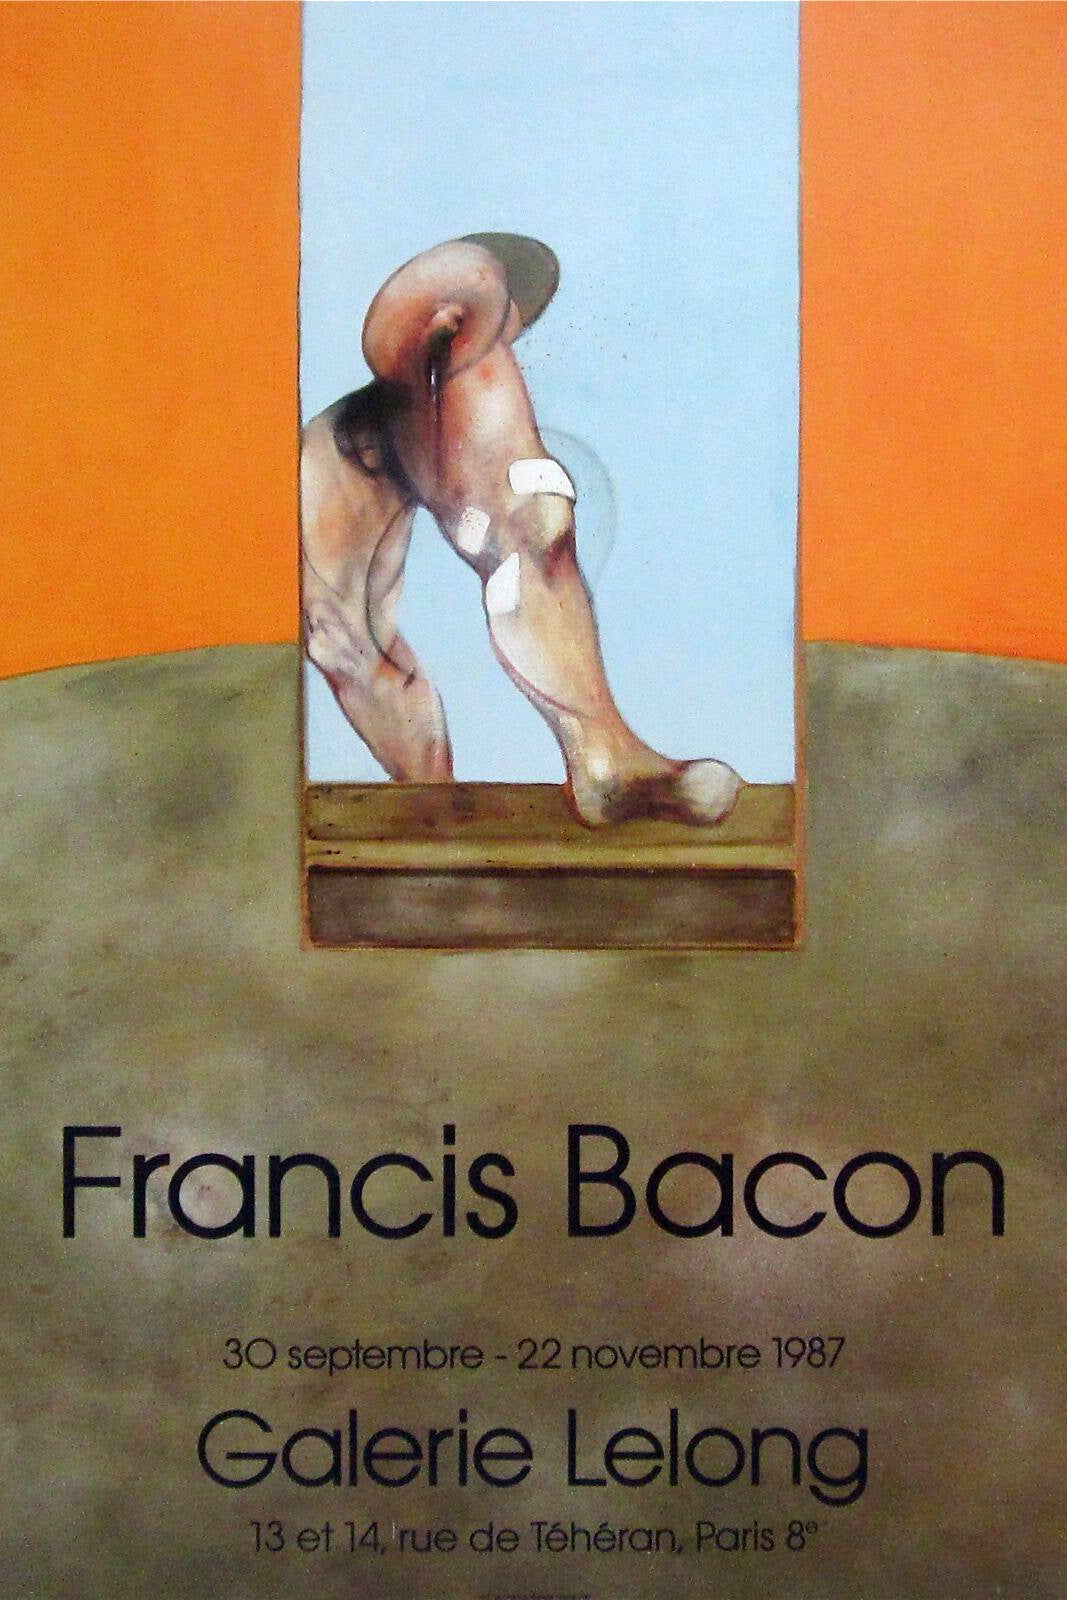 Francis Bacon,Untitled, 1987